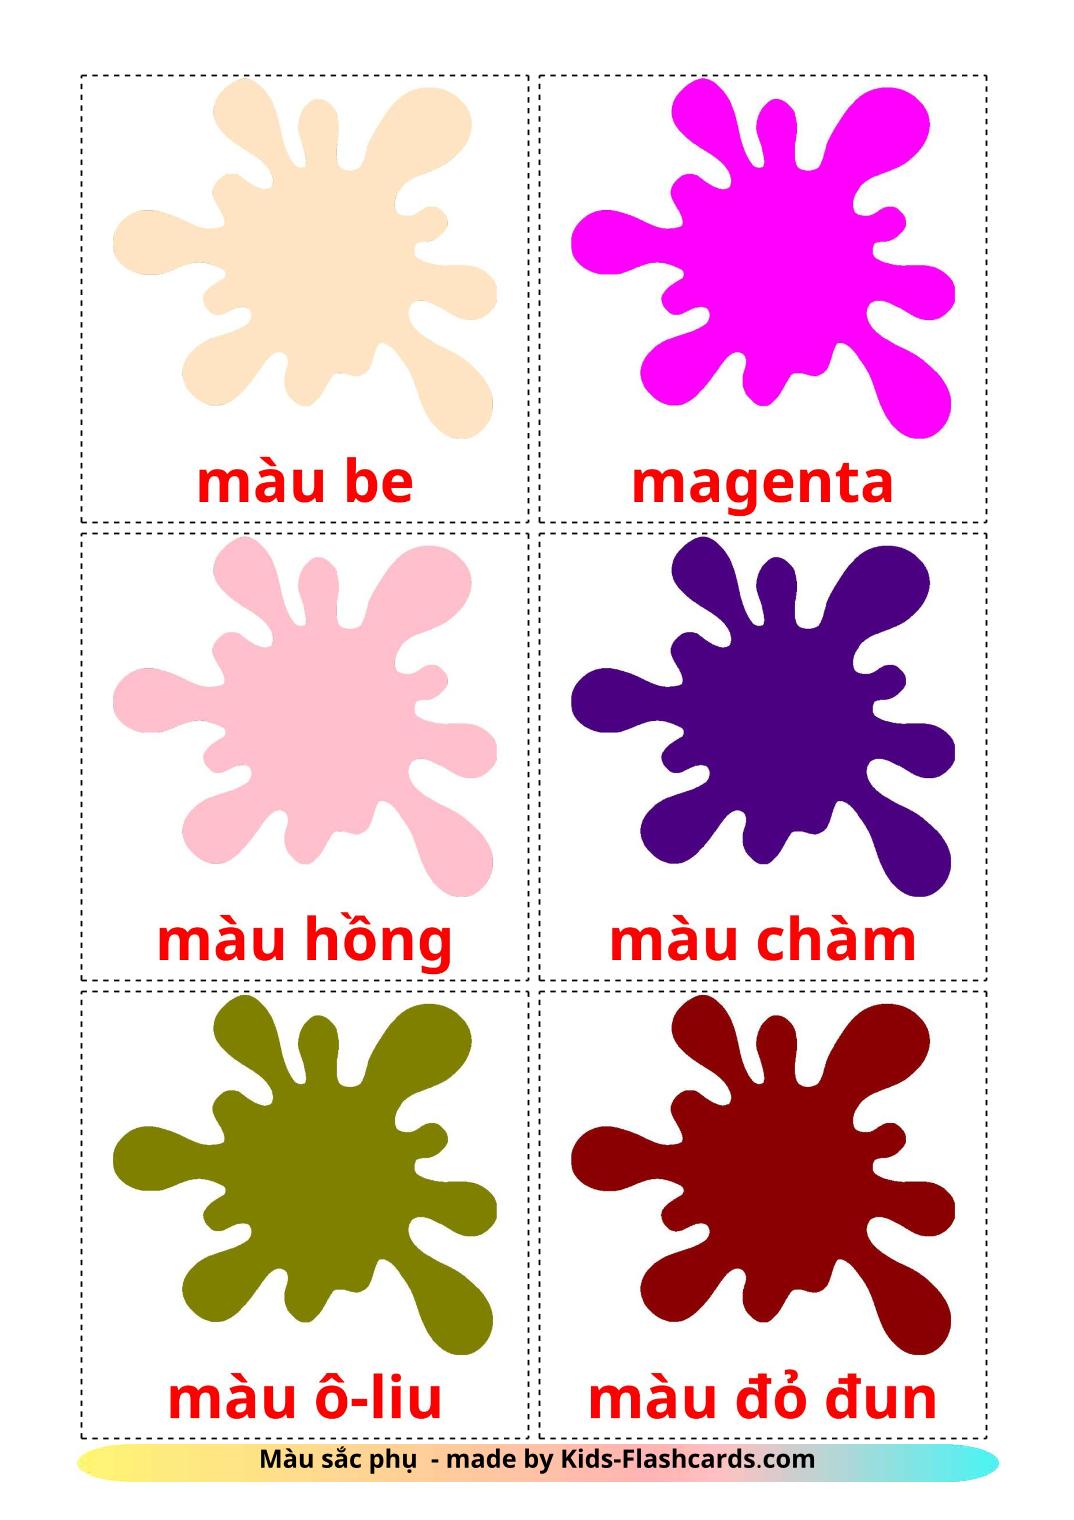 Secondary colors - 20 Free Printable vietnamese Flashcards 